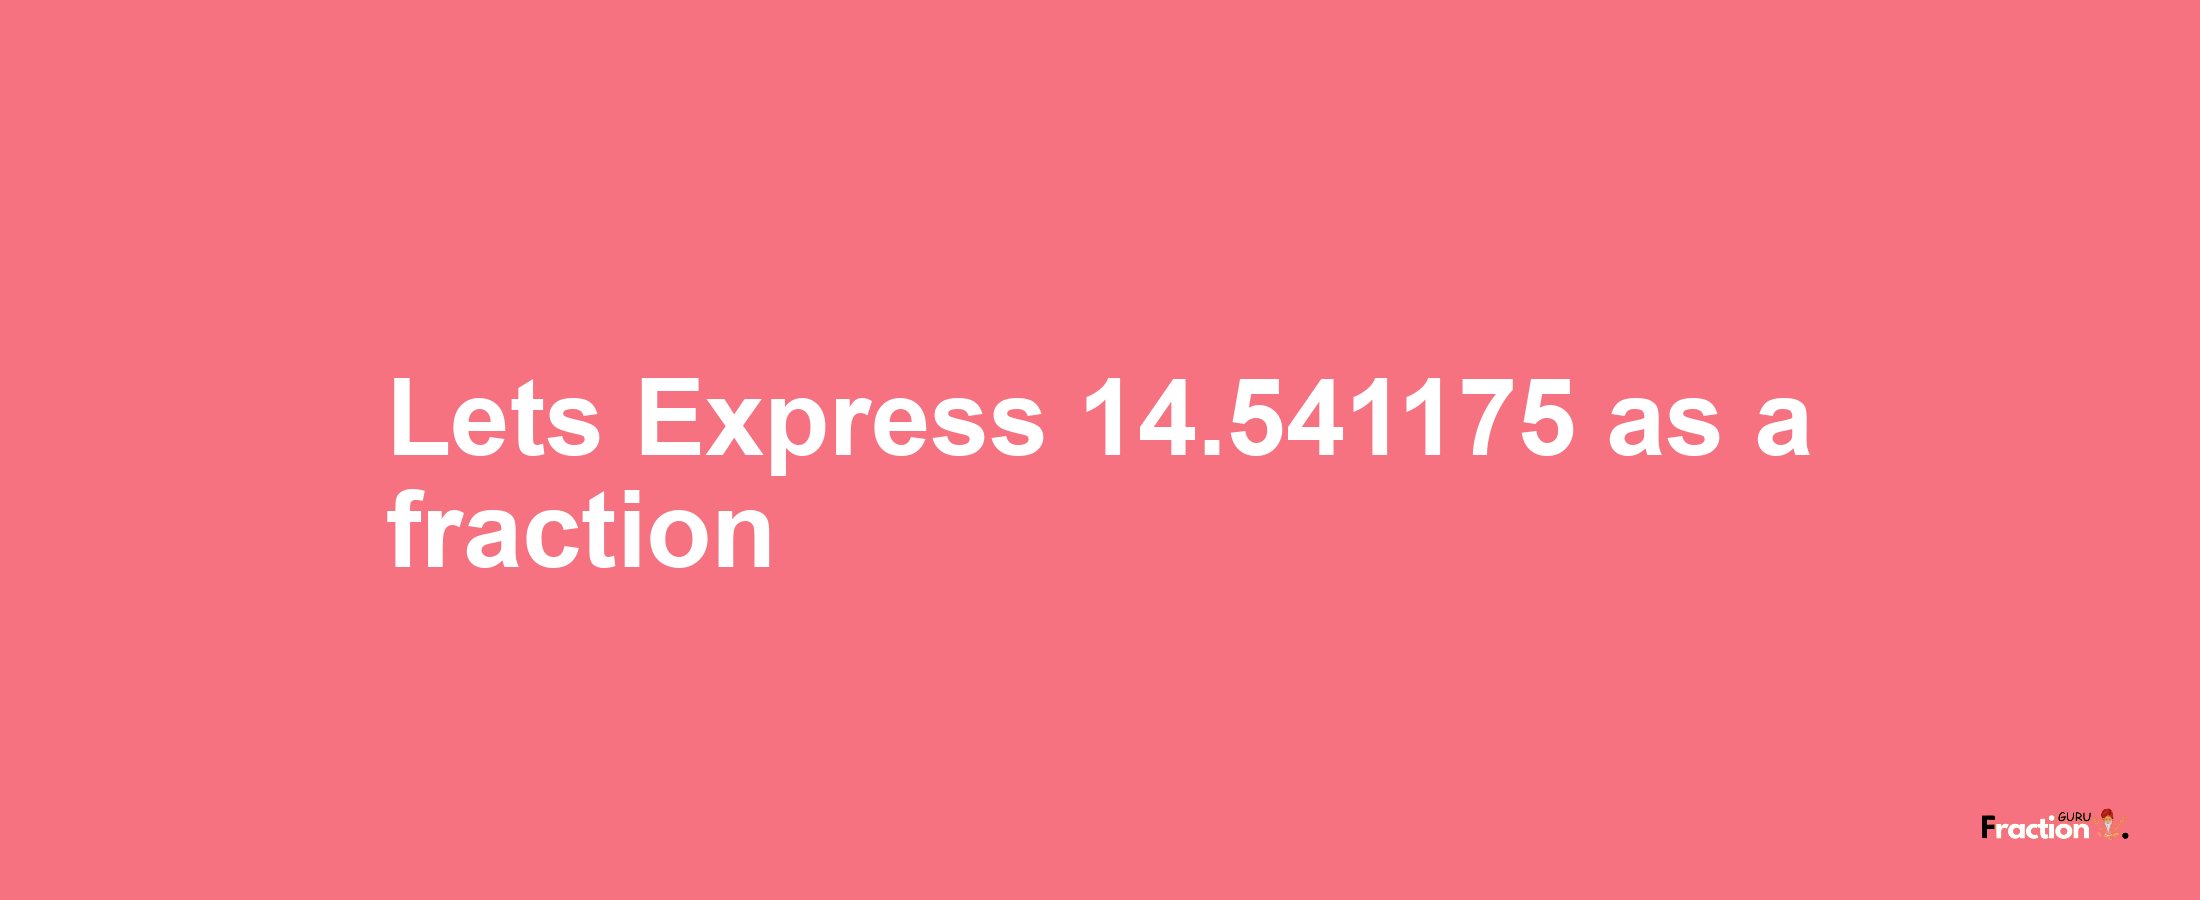 Lets Express 14.541175 as afraction